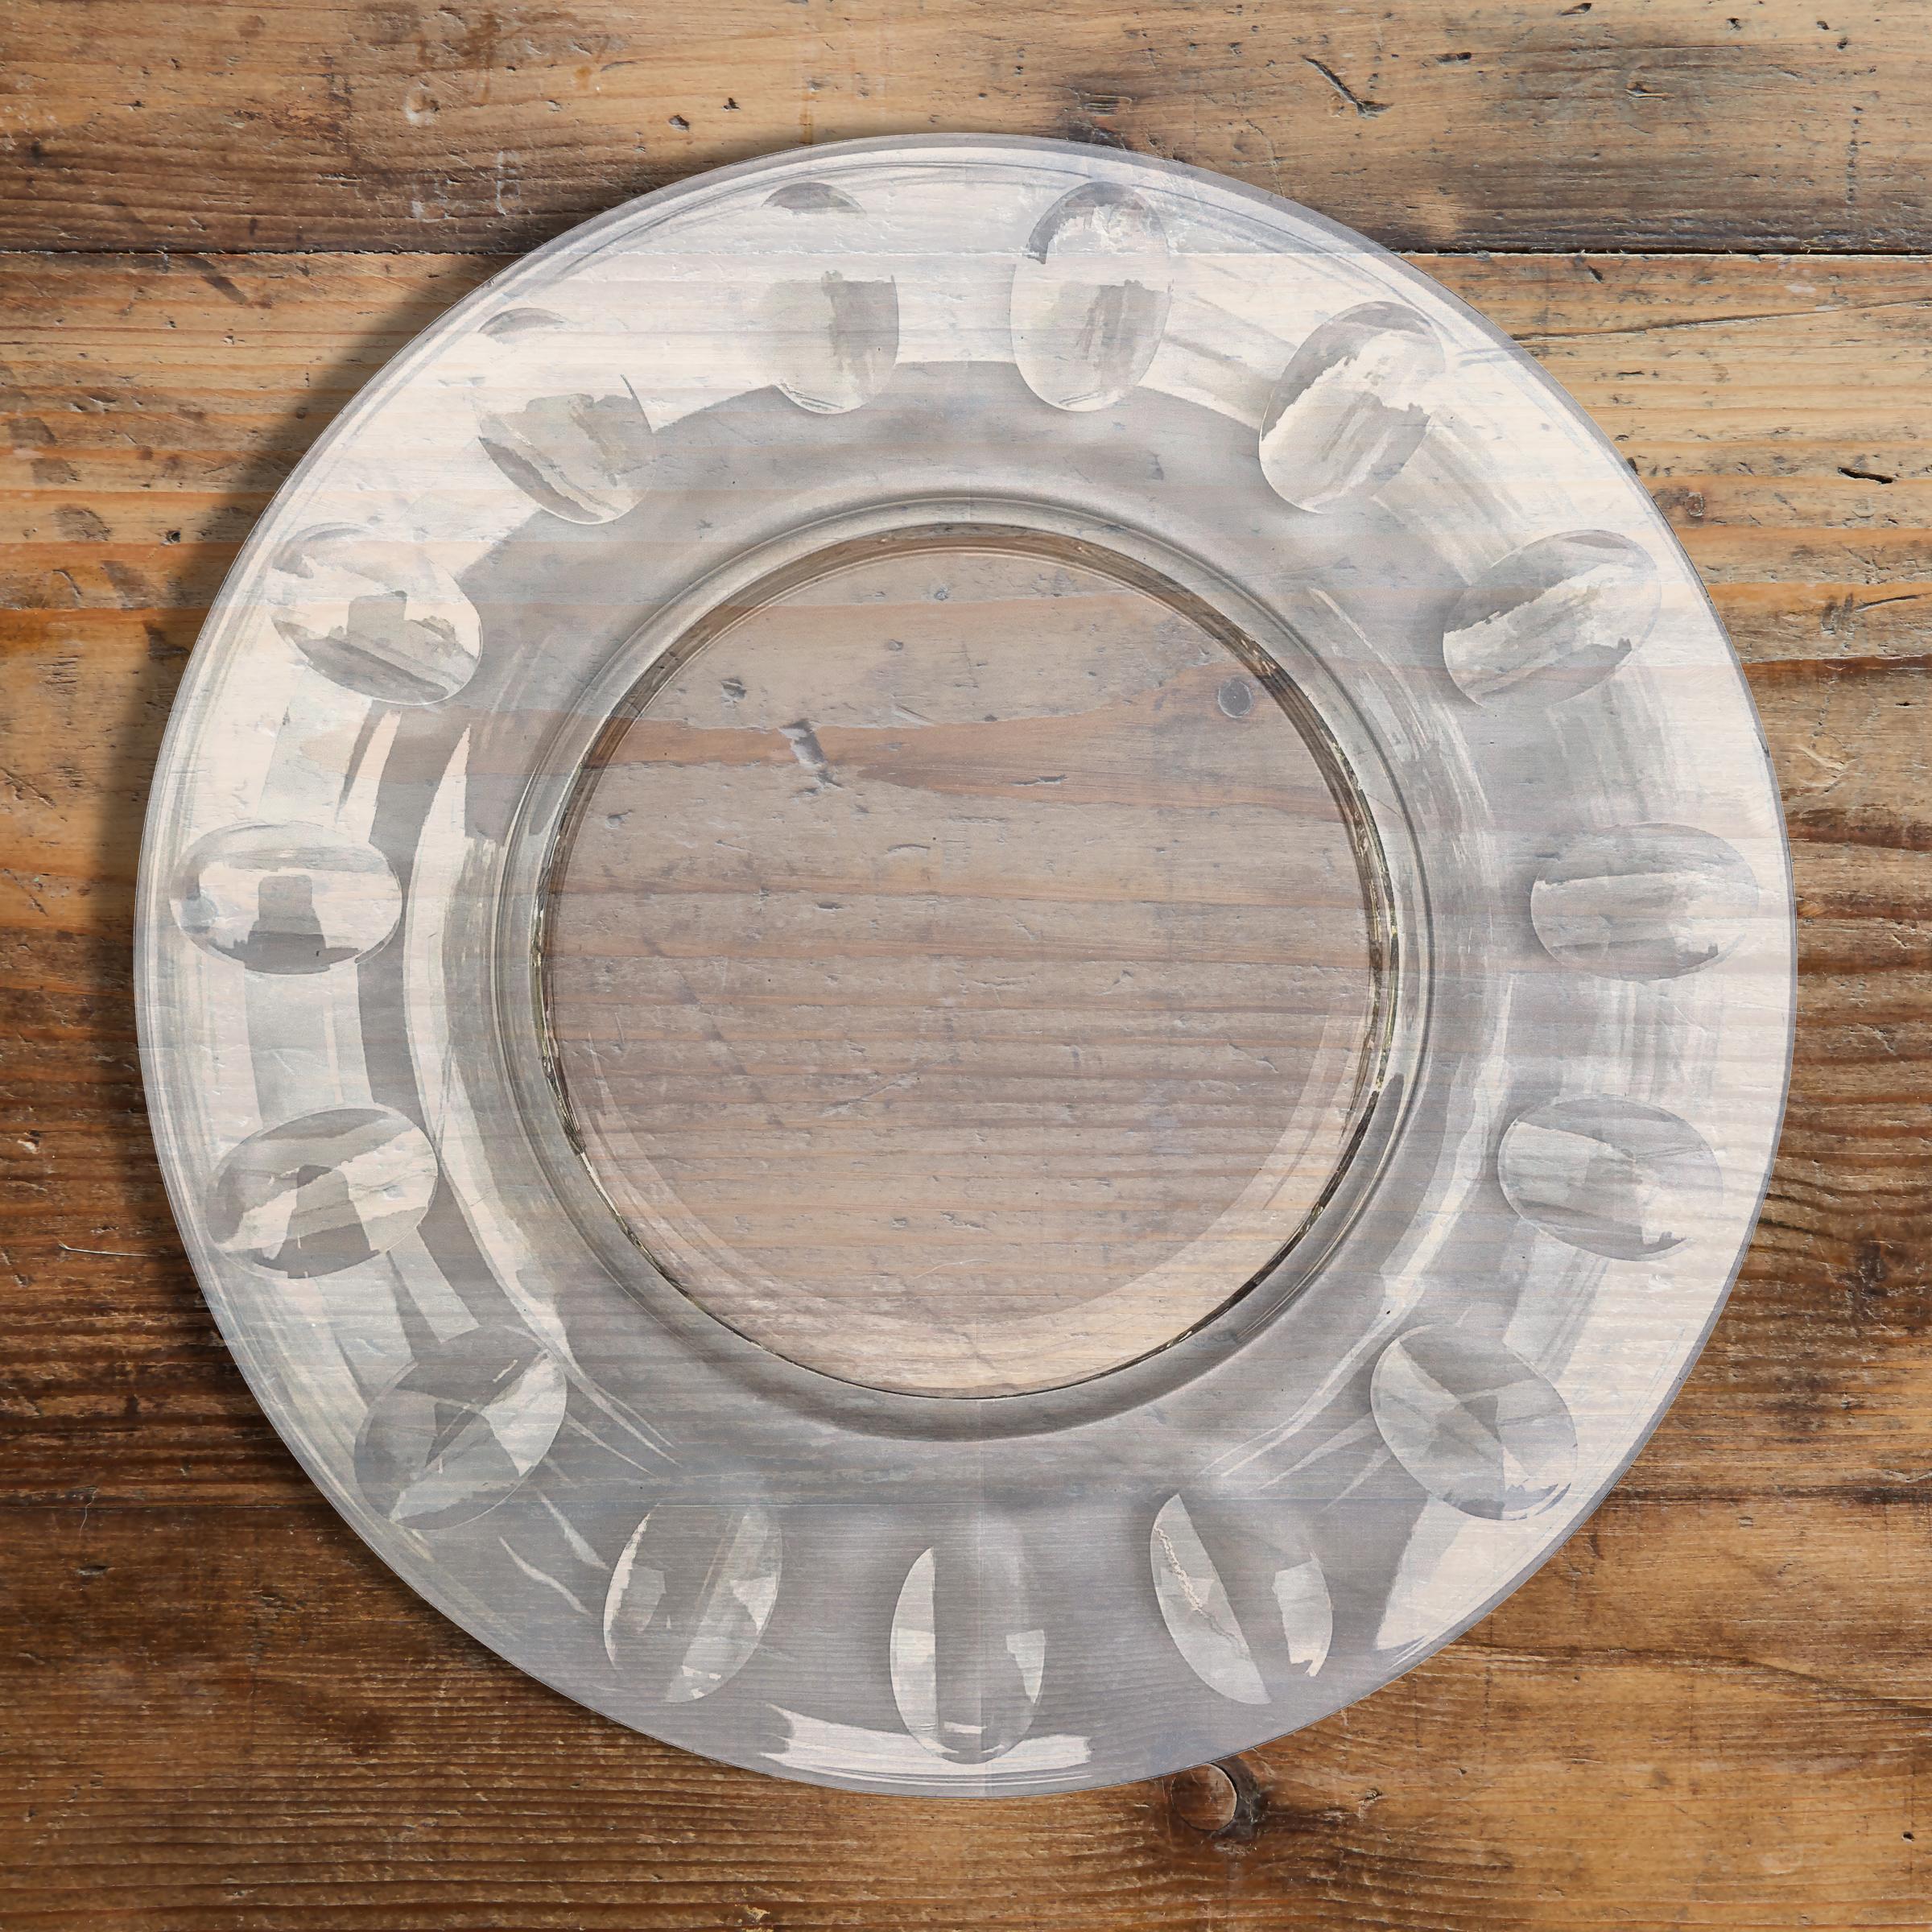 A wonderful set of ten cut crystal salad plates with a panel cut thumb print pattern, perfect for your next garden or lunch party!